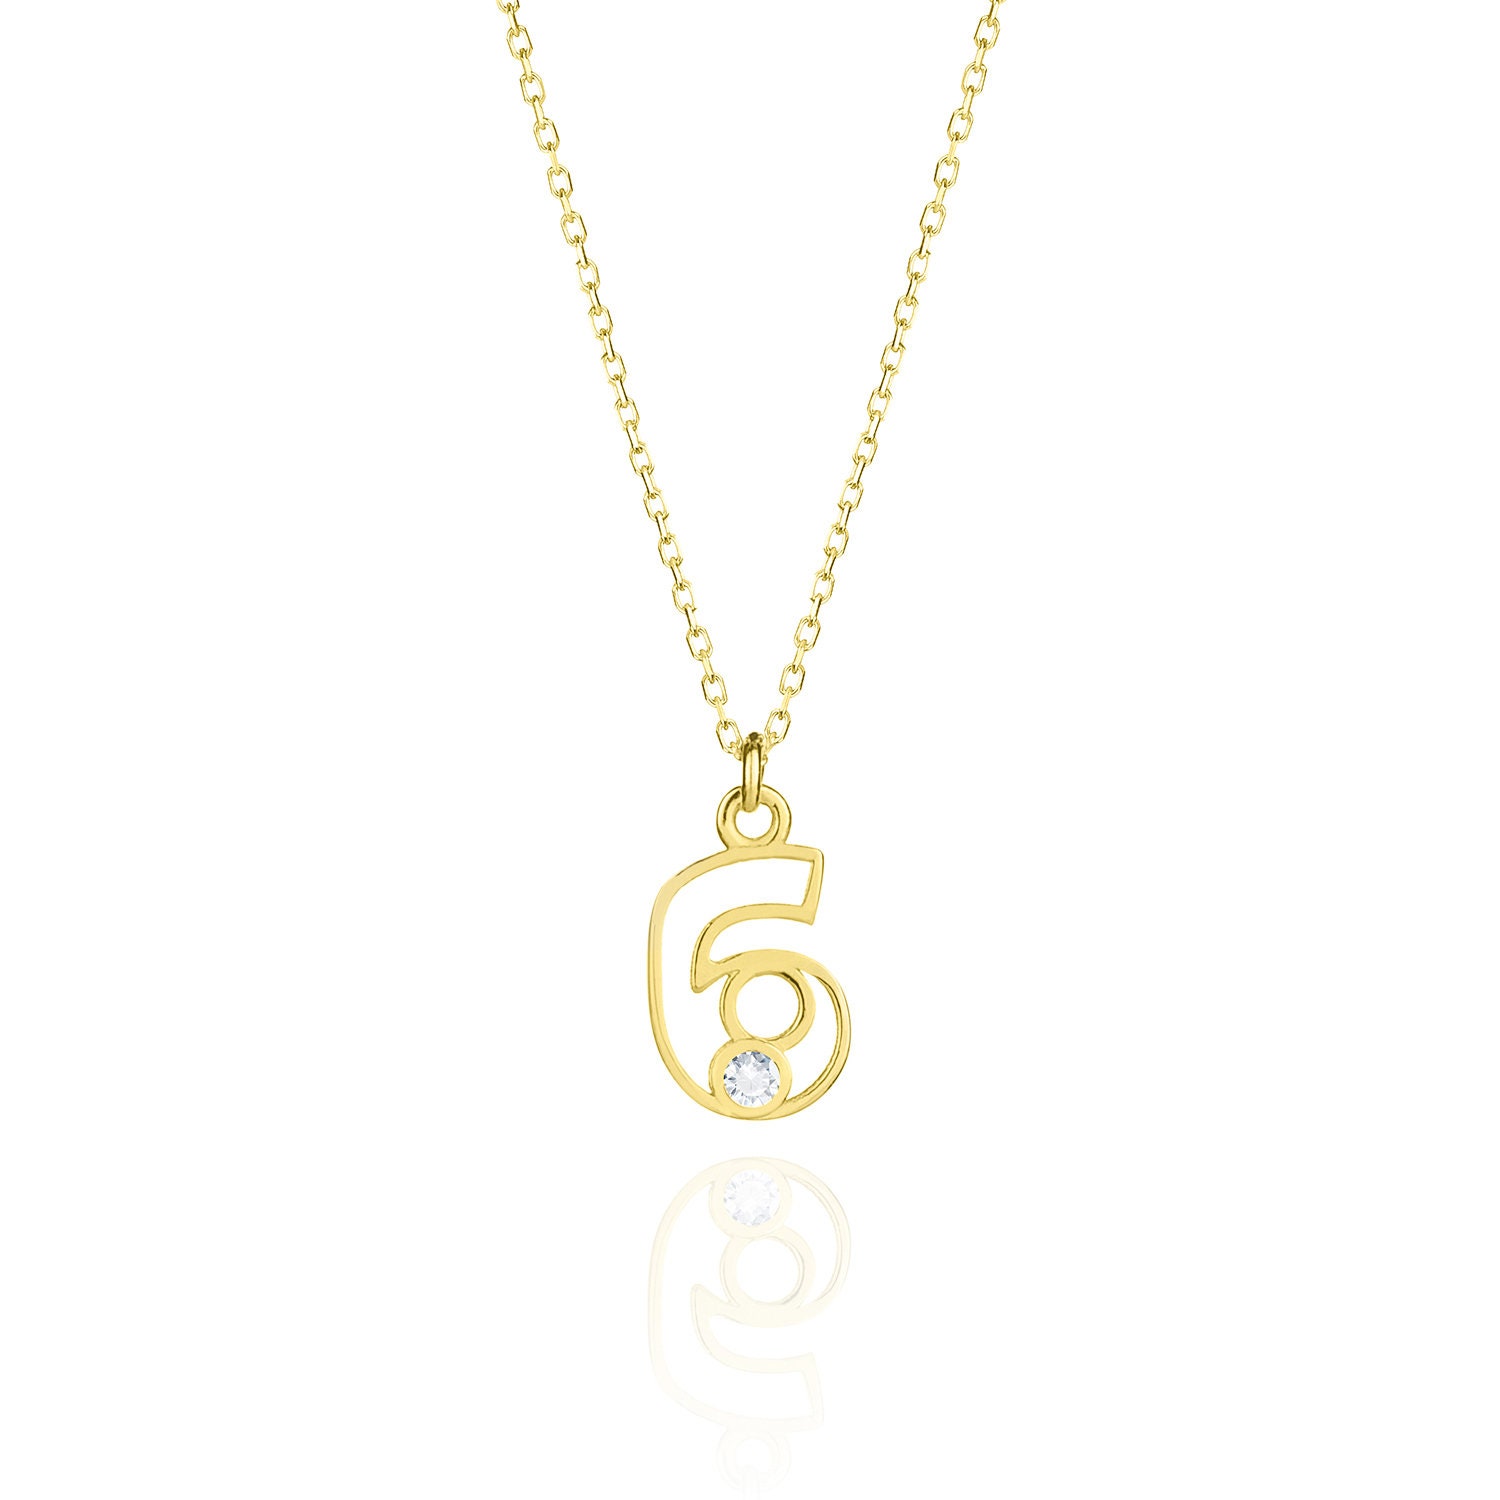 Chanel Pays Homage To N°5 Perfume With A 55.55-Carat Diamond Necklace |  Tatler Asia